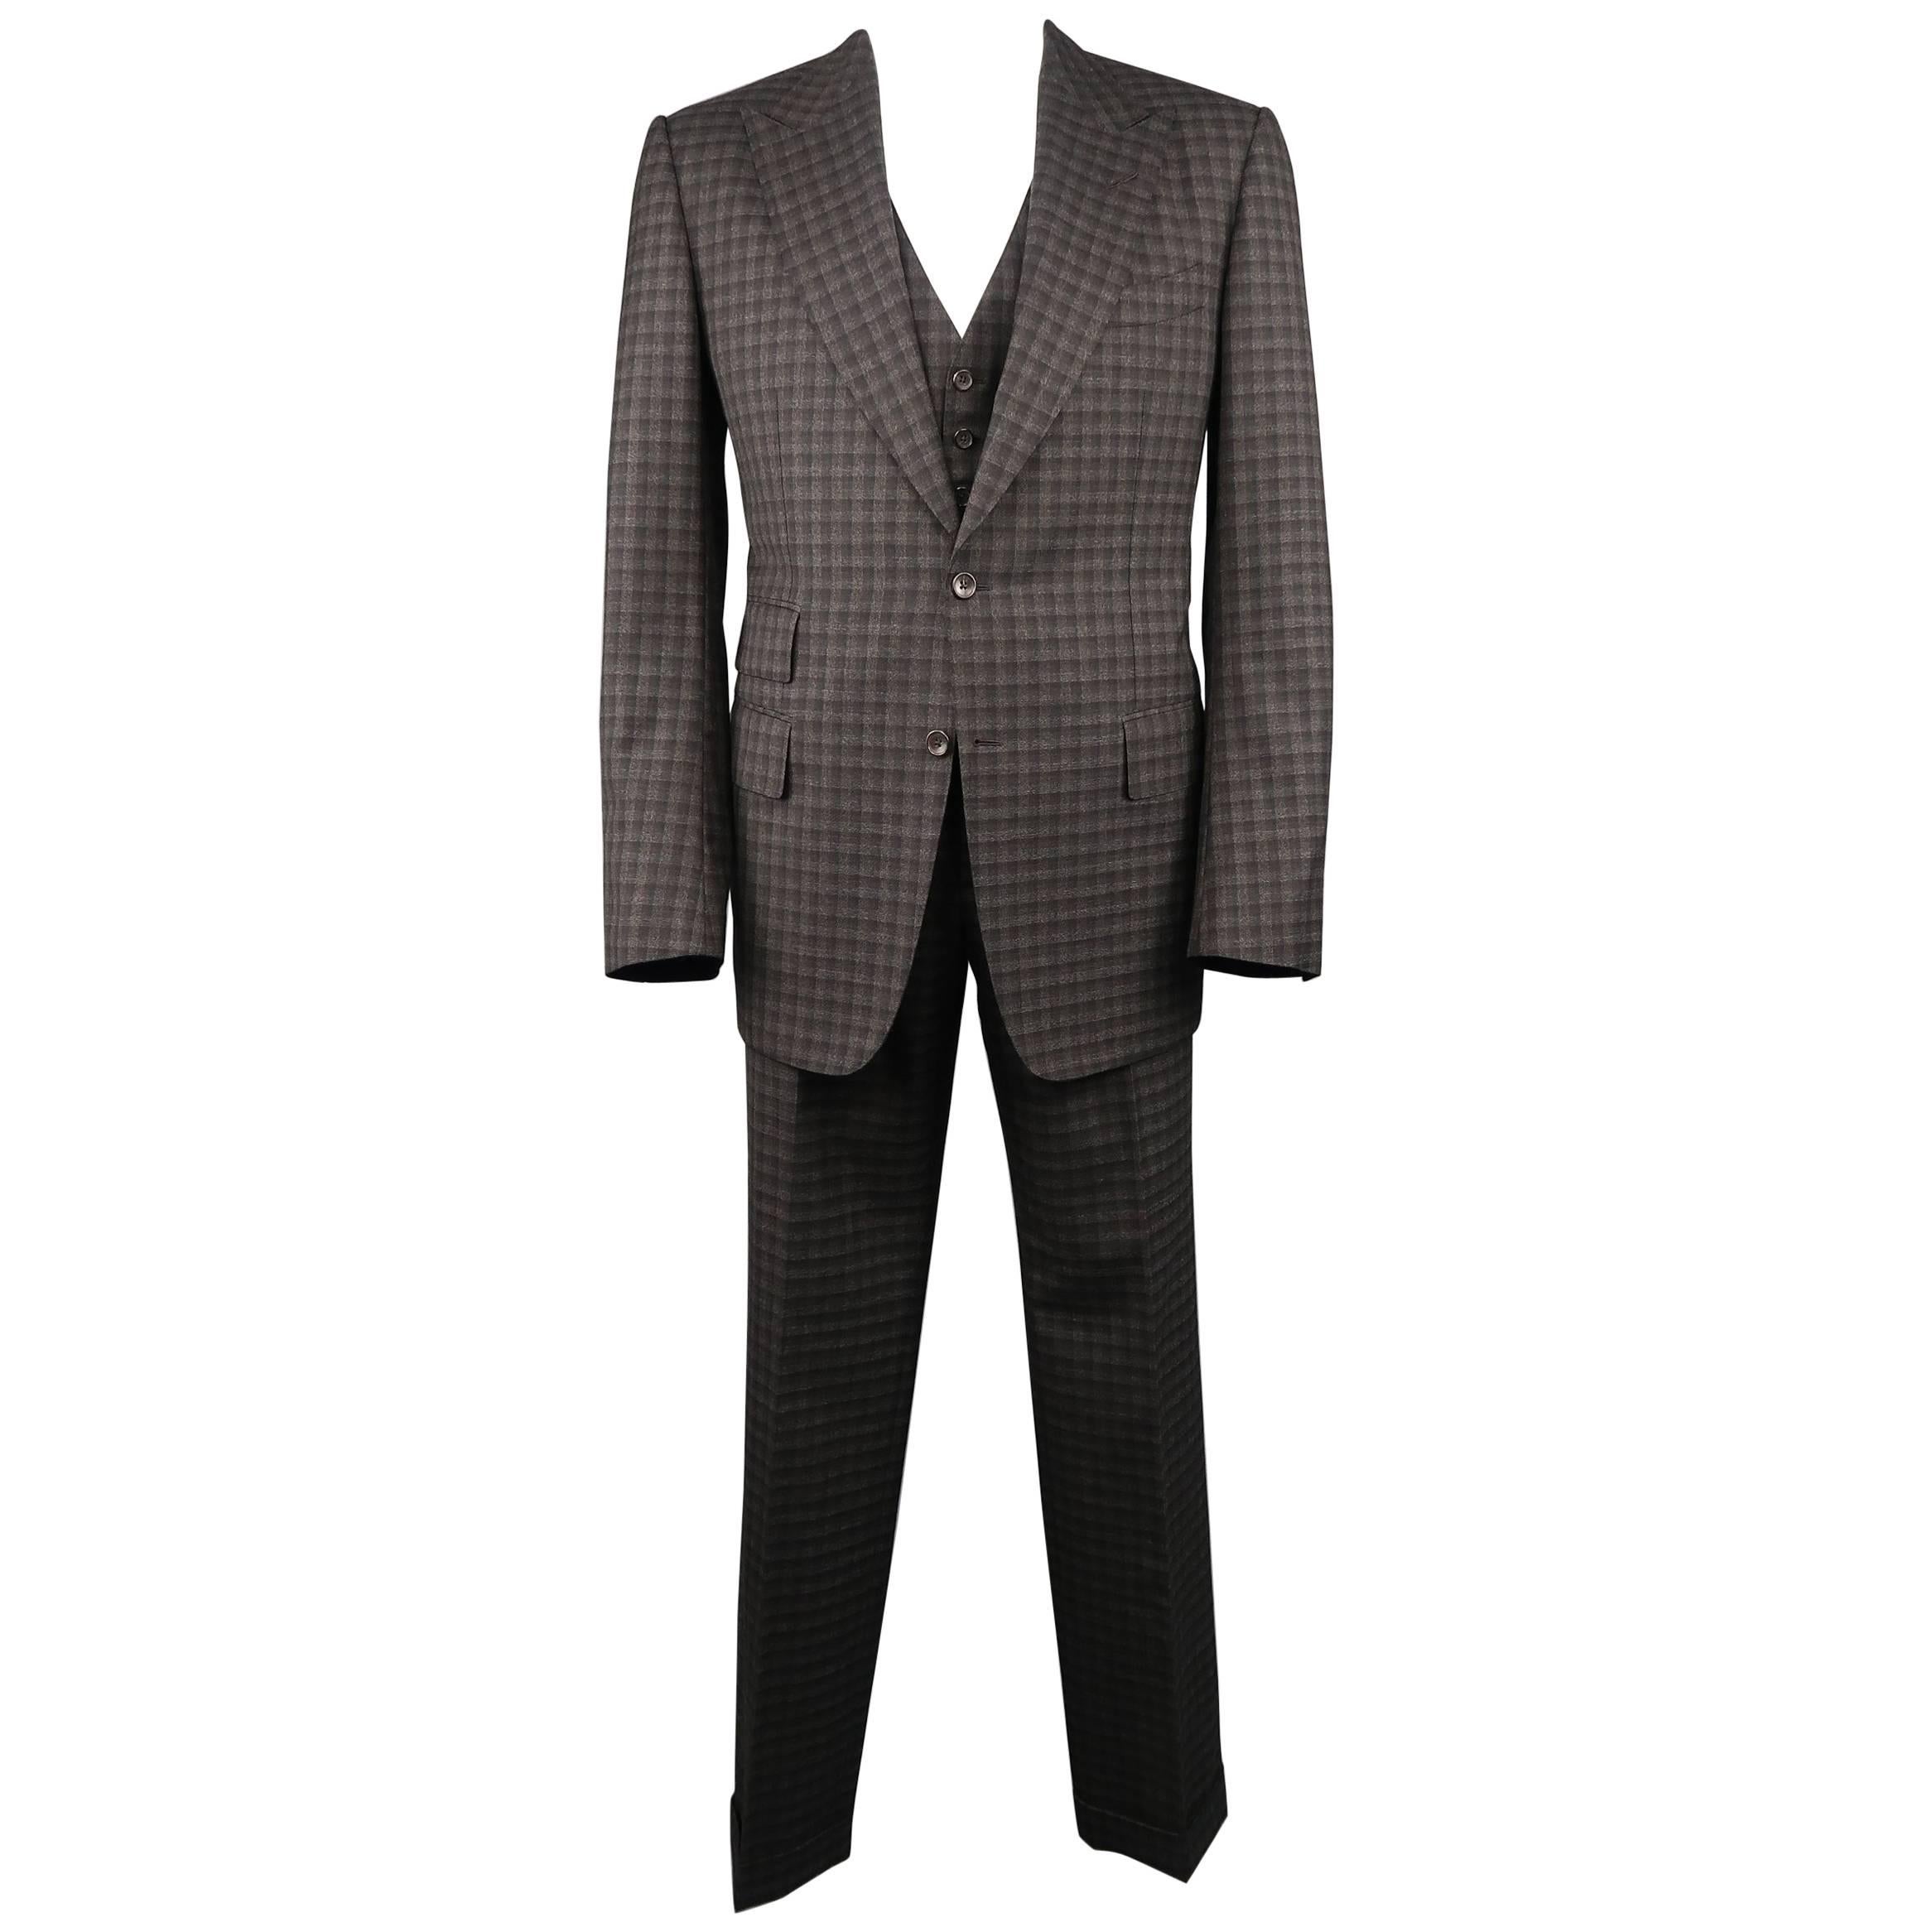 Tom Ford Suit - Men's Grey and Brown Checkered Tartan Wool Three Piece Jacket